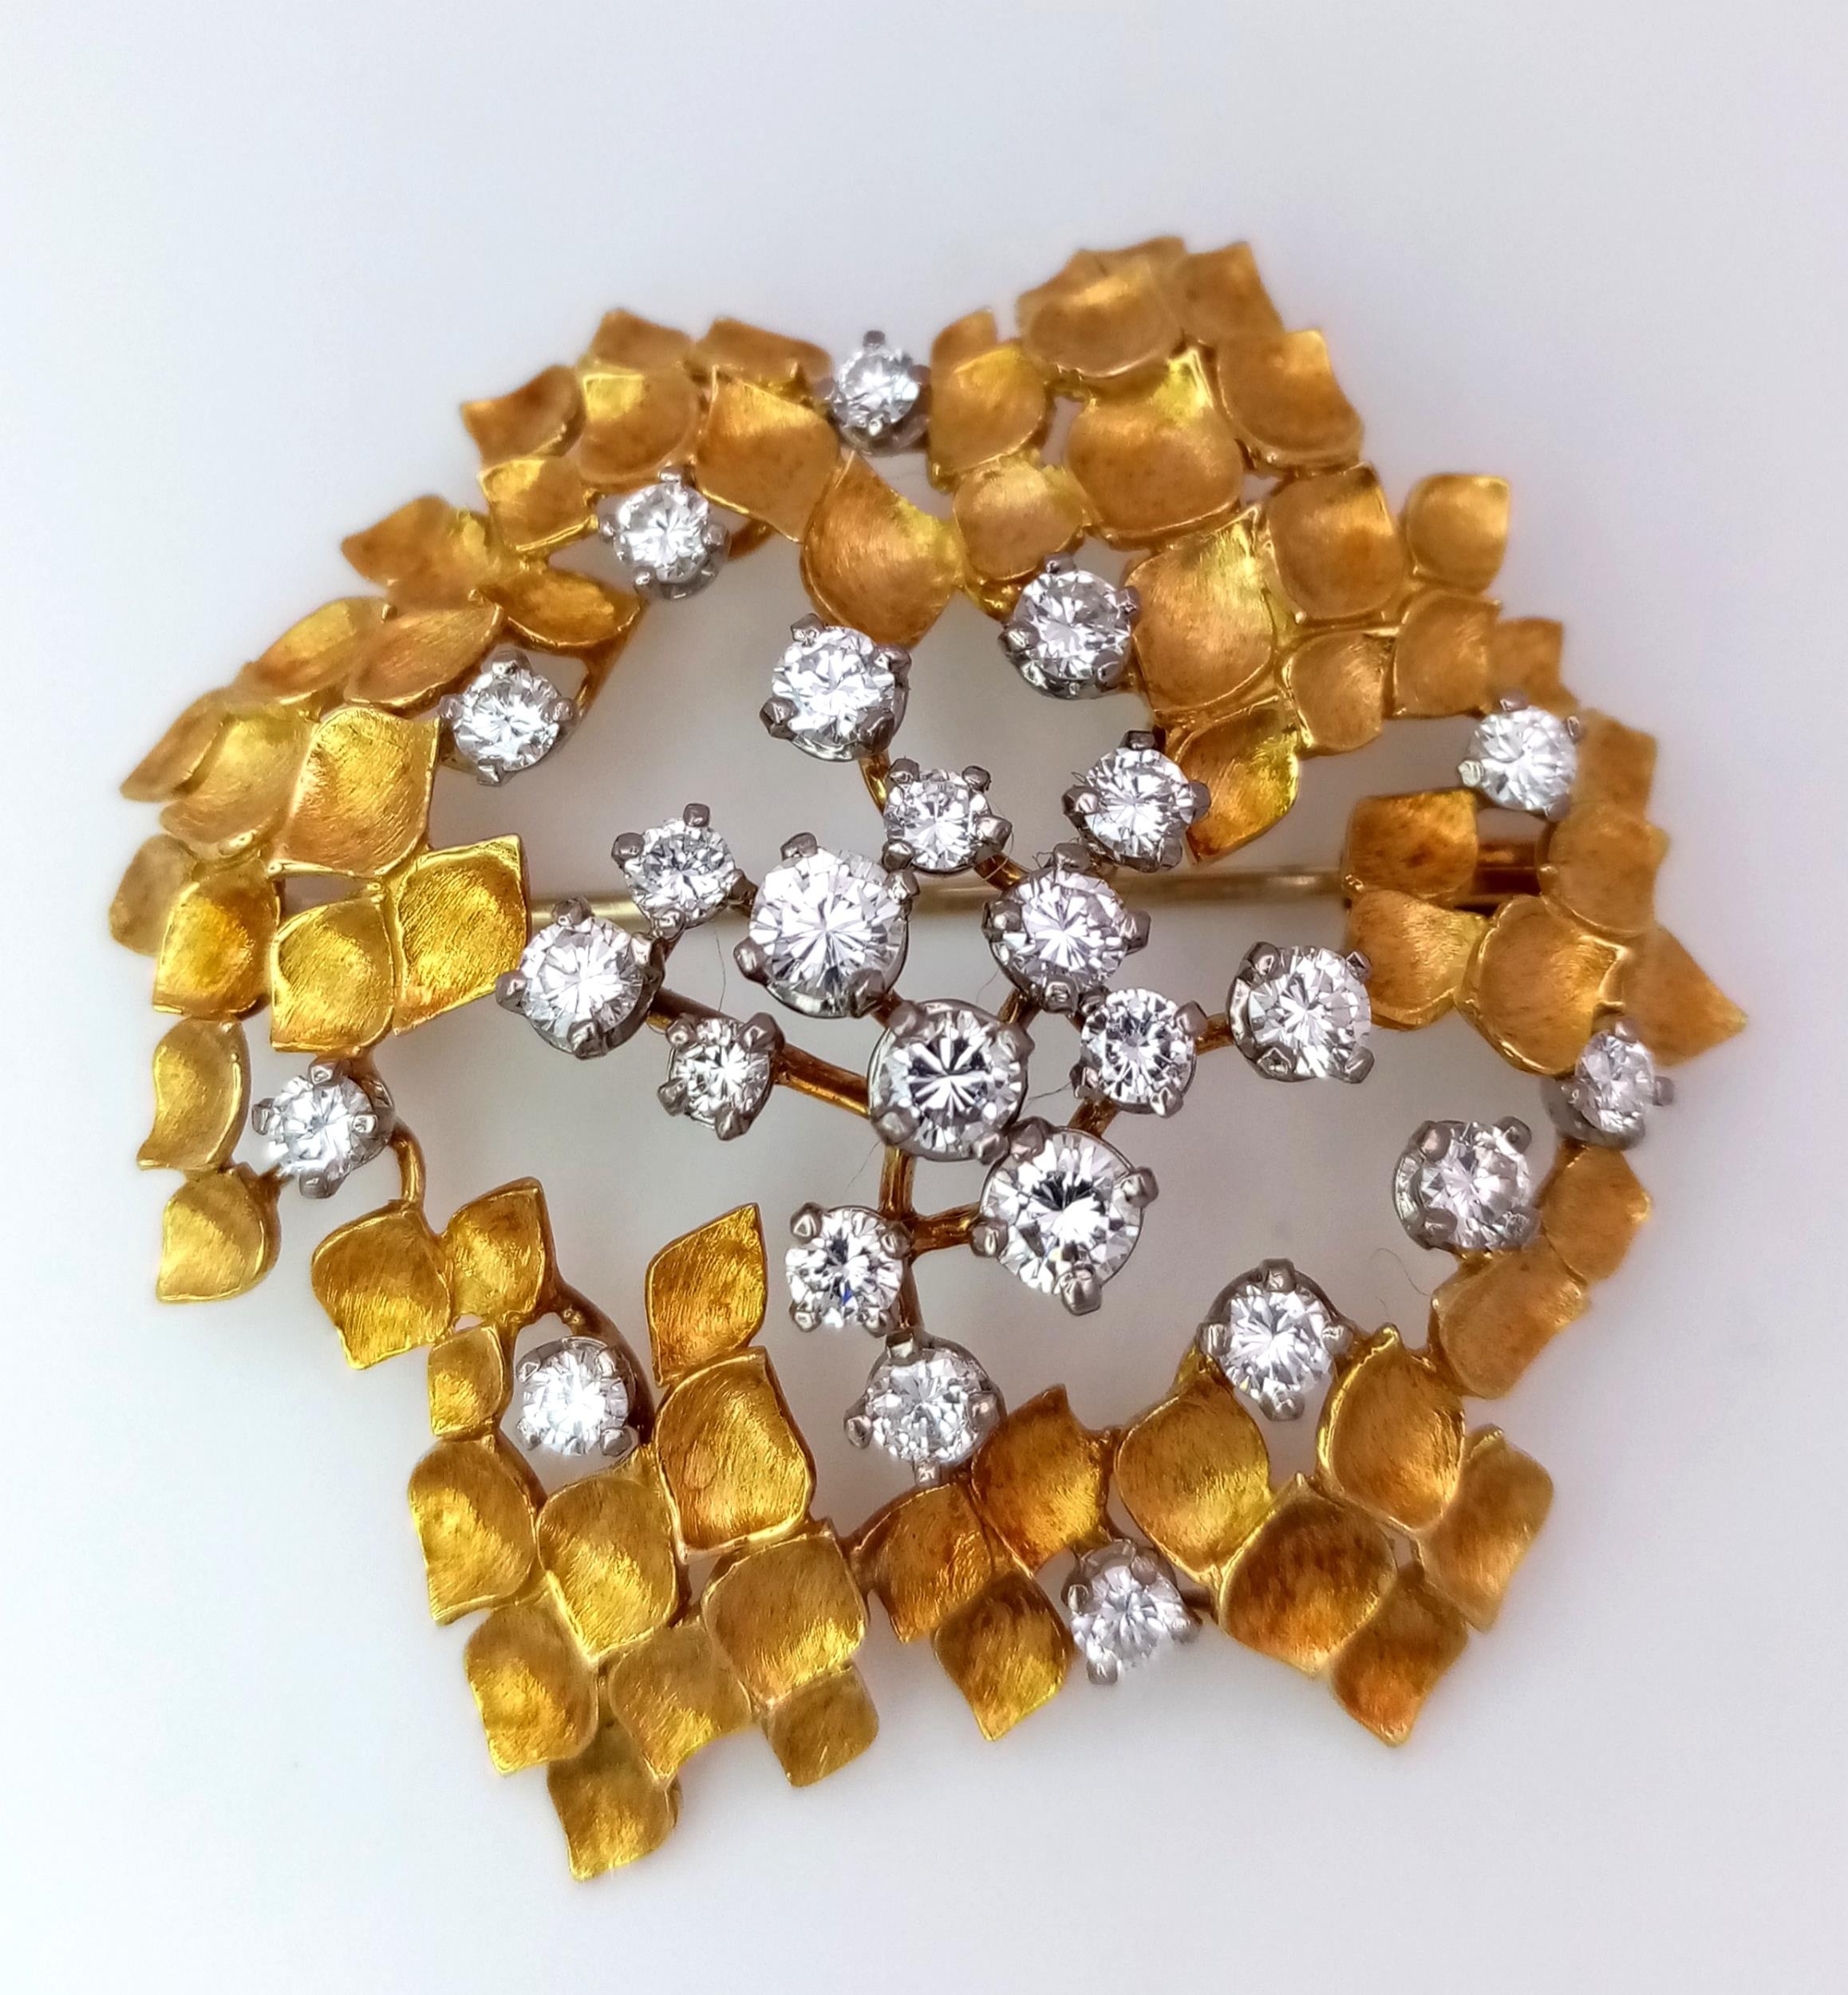 A Magical 18K Yellow Gold and Diamond Brooch. 1.5ctw of brilliant round cut diamonds amongst